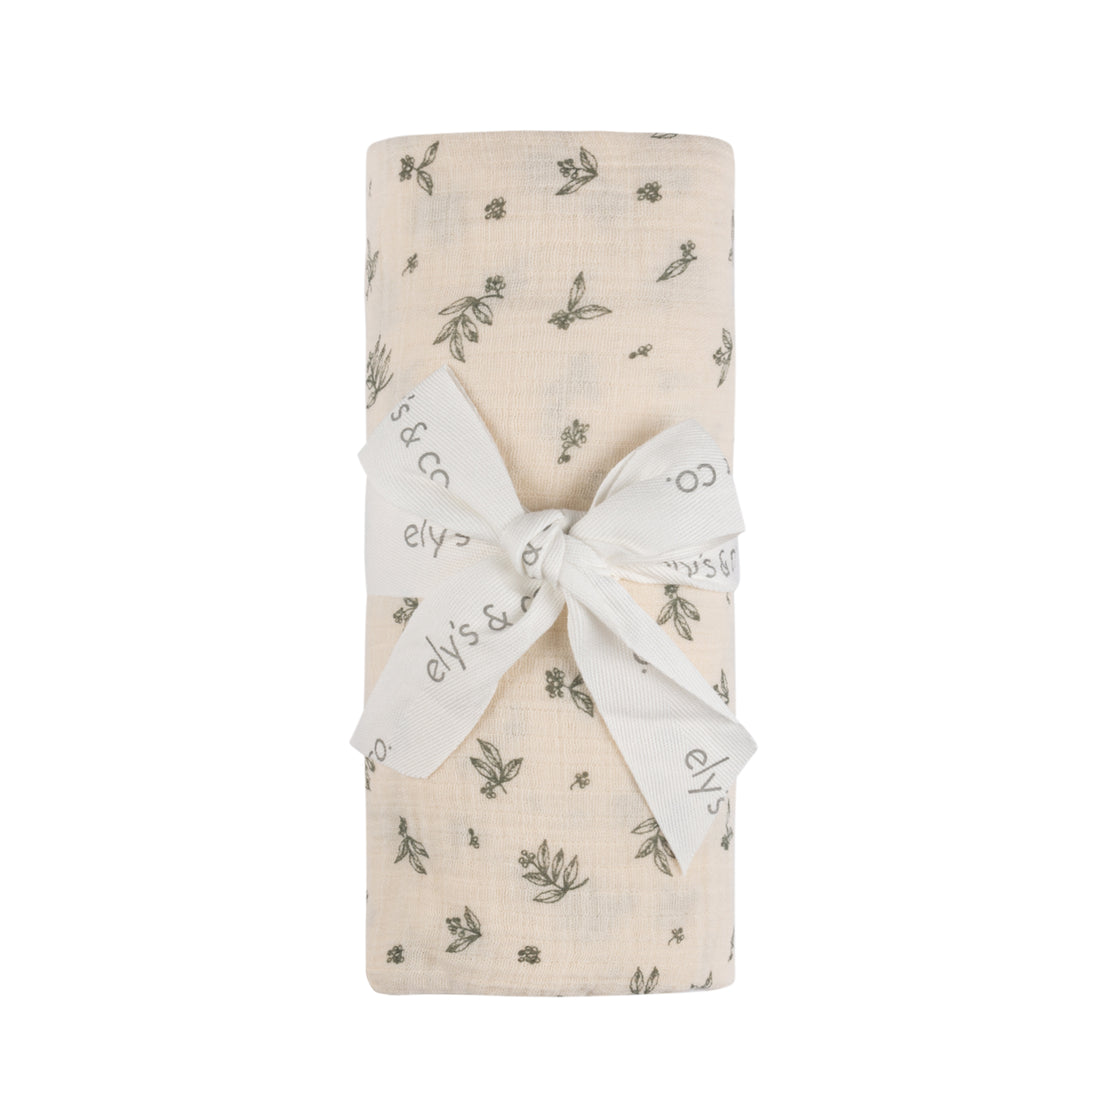 Ely`s & Co Muslin Swaddle - Emerald